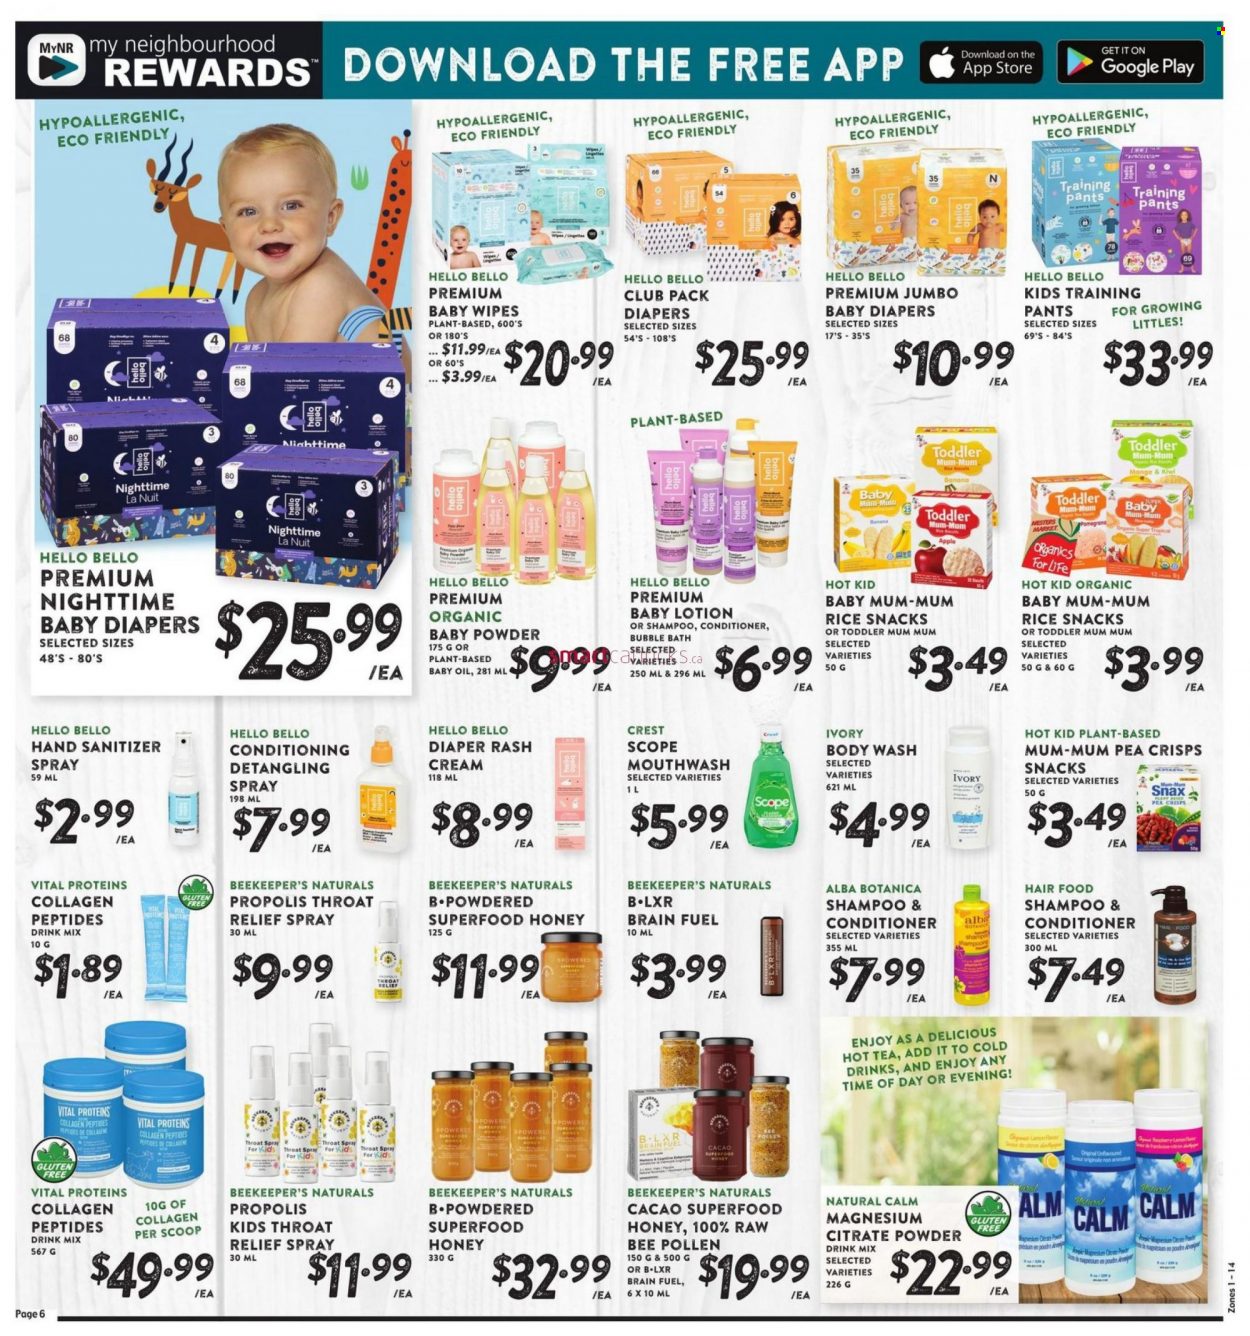 thumbnail - Nesters Food Market Flyer - April 24, 2022 - May 21, 2022 - Sales products - snack, rice, honey, tea, wipes, pants, baby wipes, nappies, baby pants, baby powder, baby oil, body wash, bubble bath, mouthwash, Crest, conditioner, body lotion, Mum, hand sanitizer, magnesium, Vital Proteins, kiwi, shampoo. Page 6.